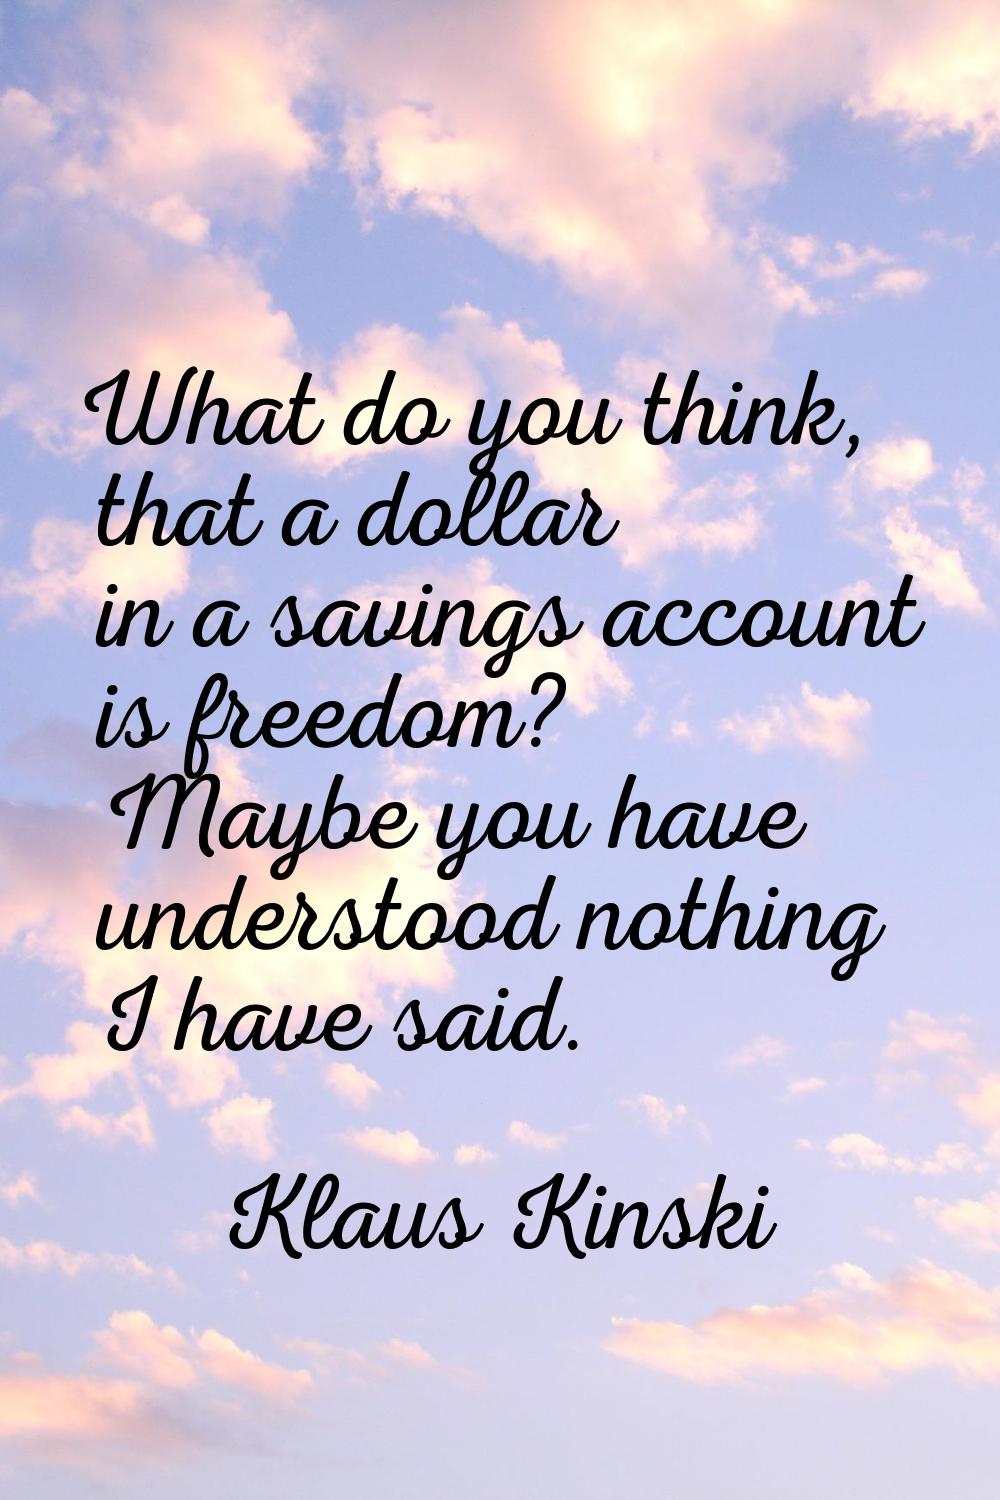 What do you think, that a dollar in a savings account is freedom? Maybe you have understood nothing